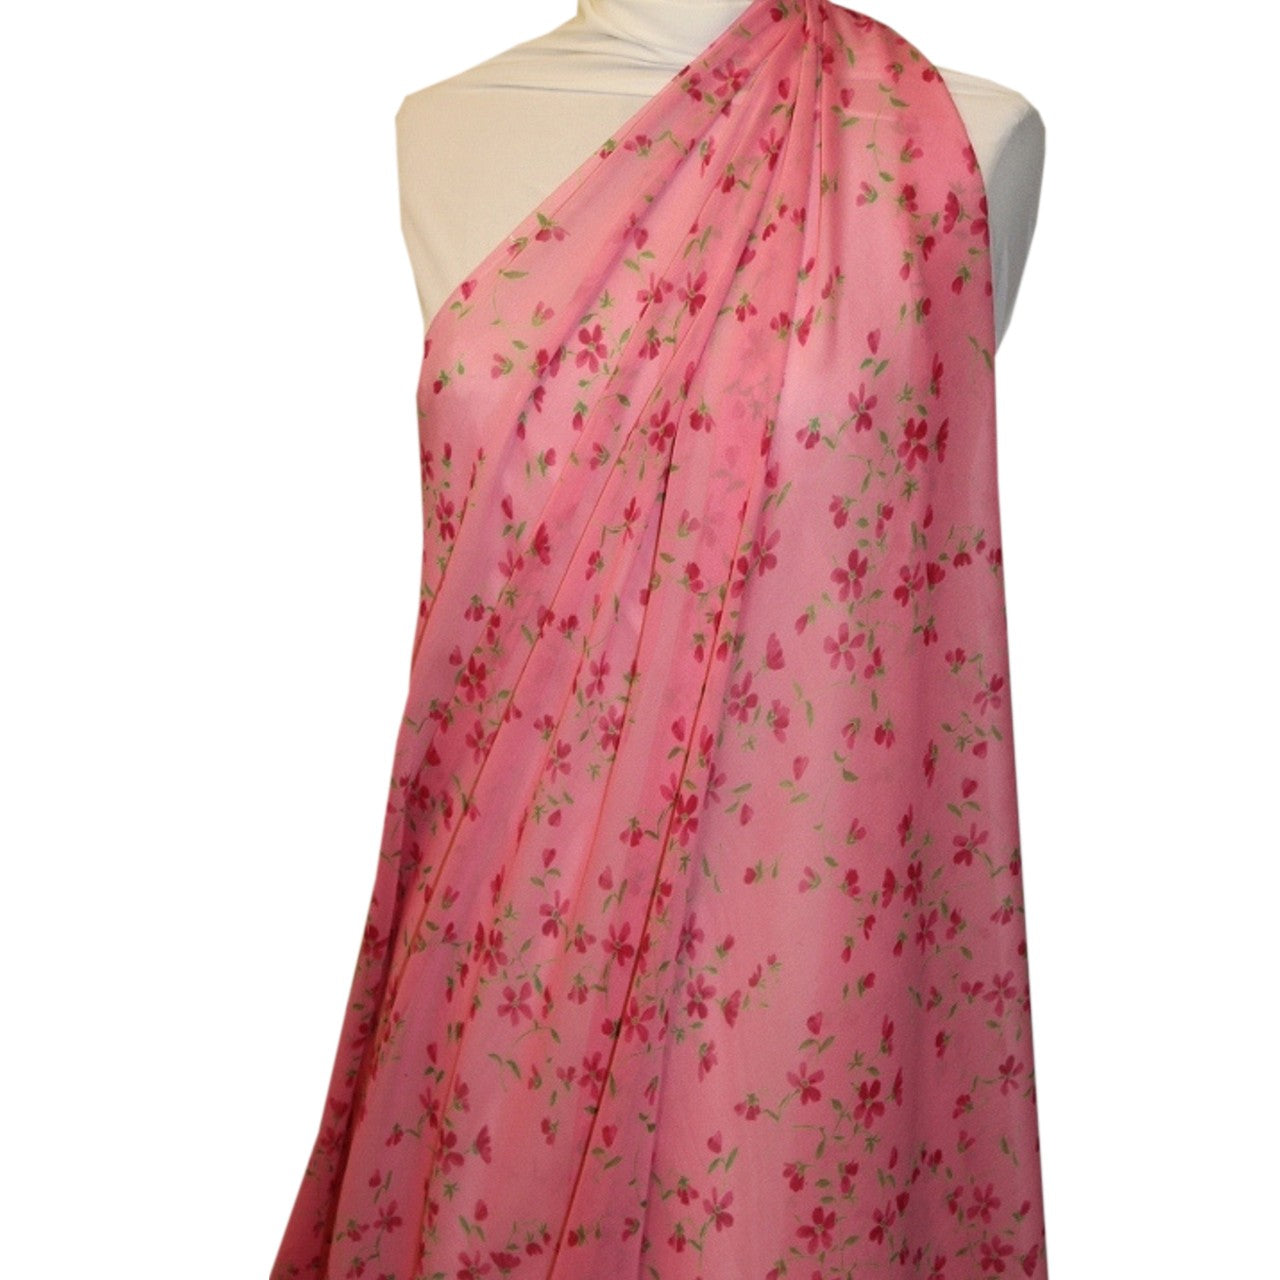 Blossomed Floral Printed Silk Chiffon - Shades of Pink/Periwinkle